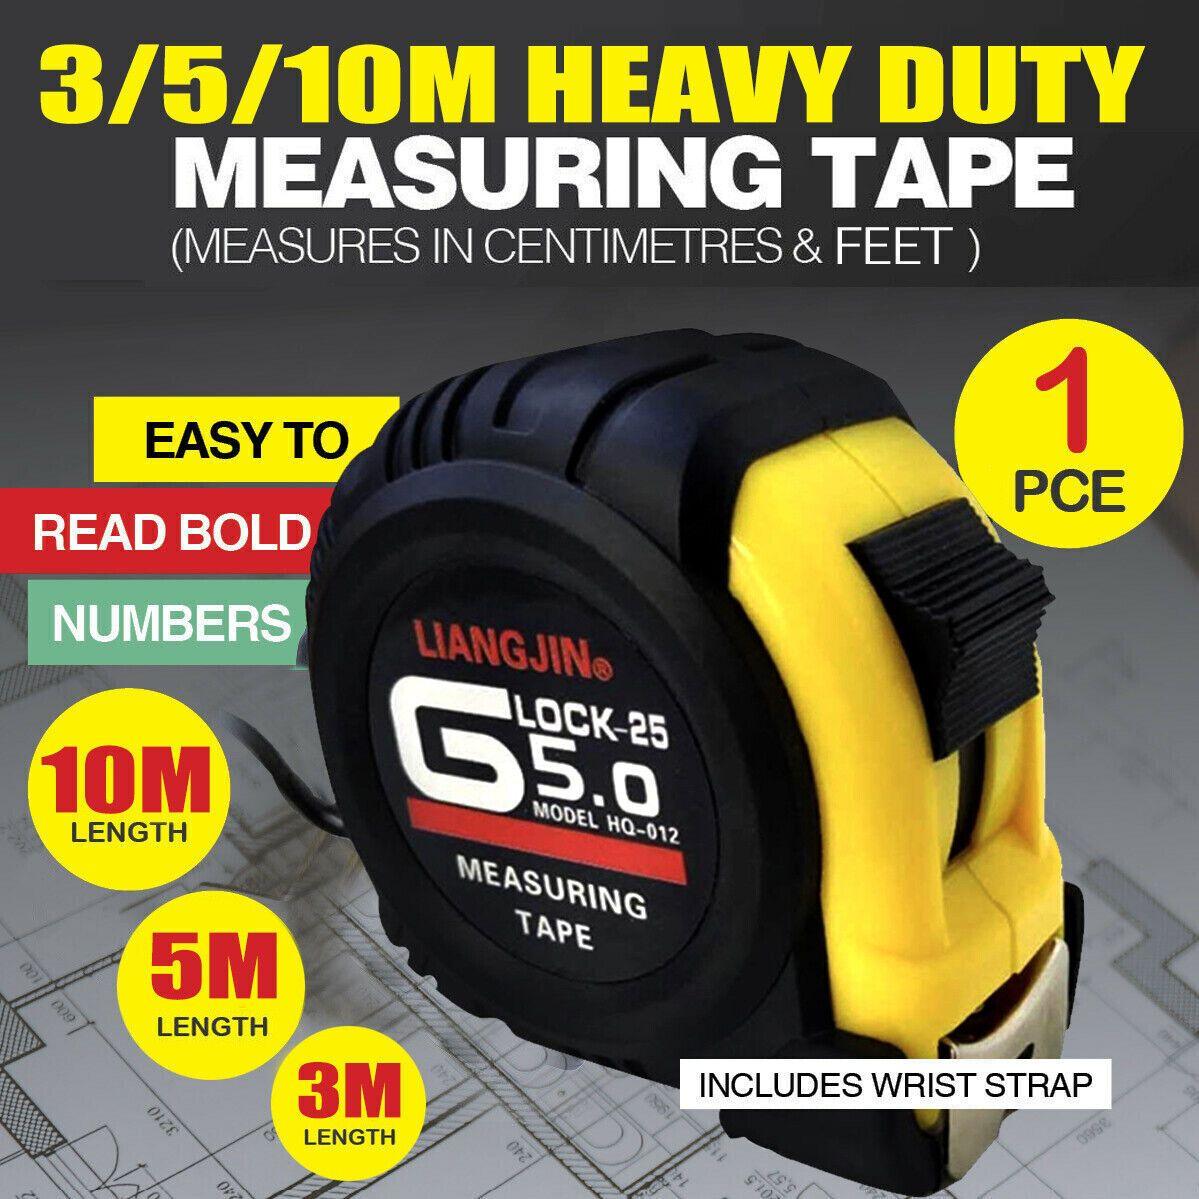 A professional using the best tape measure to accurately measure wood for a construction project.